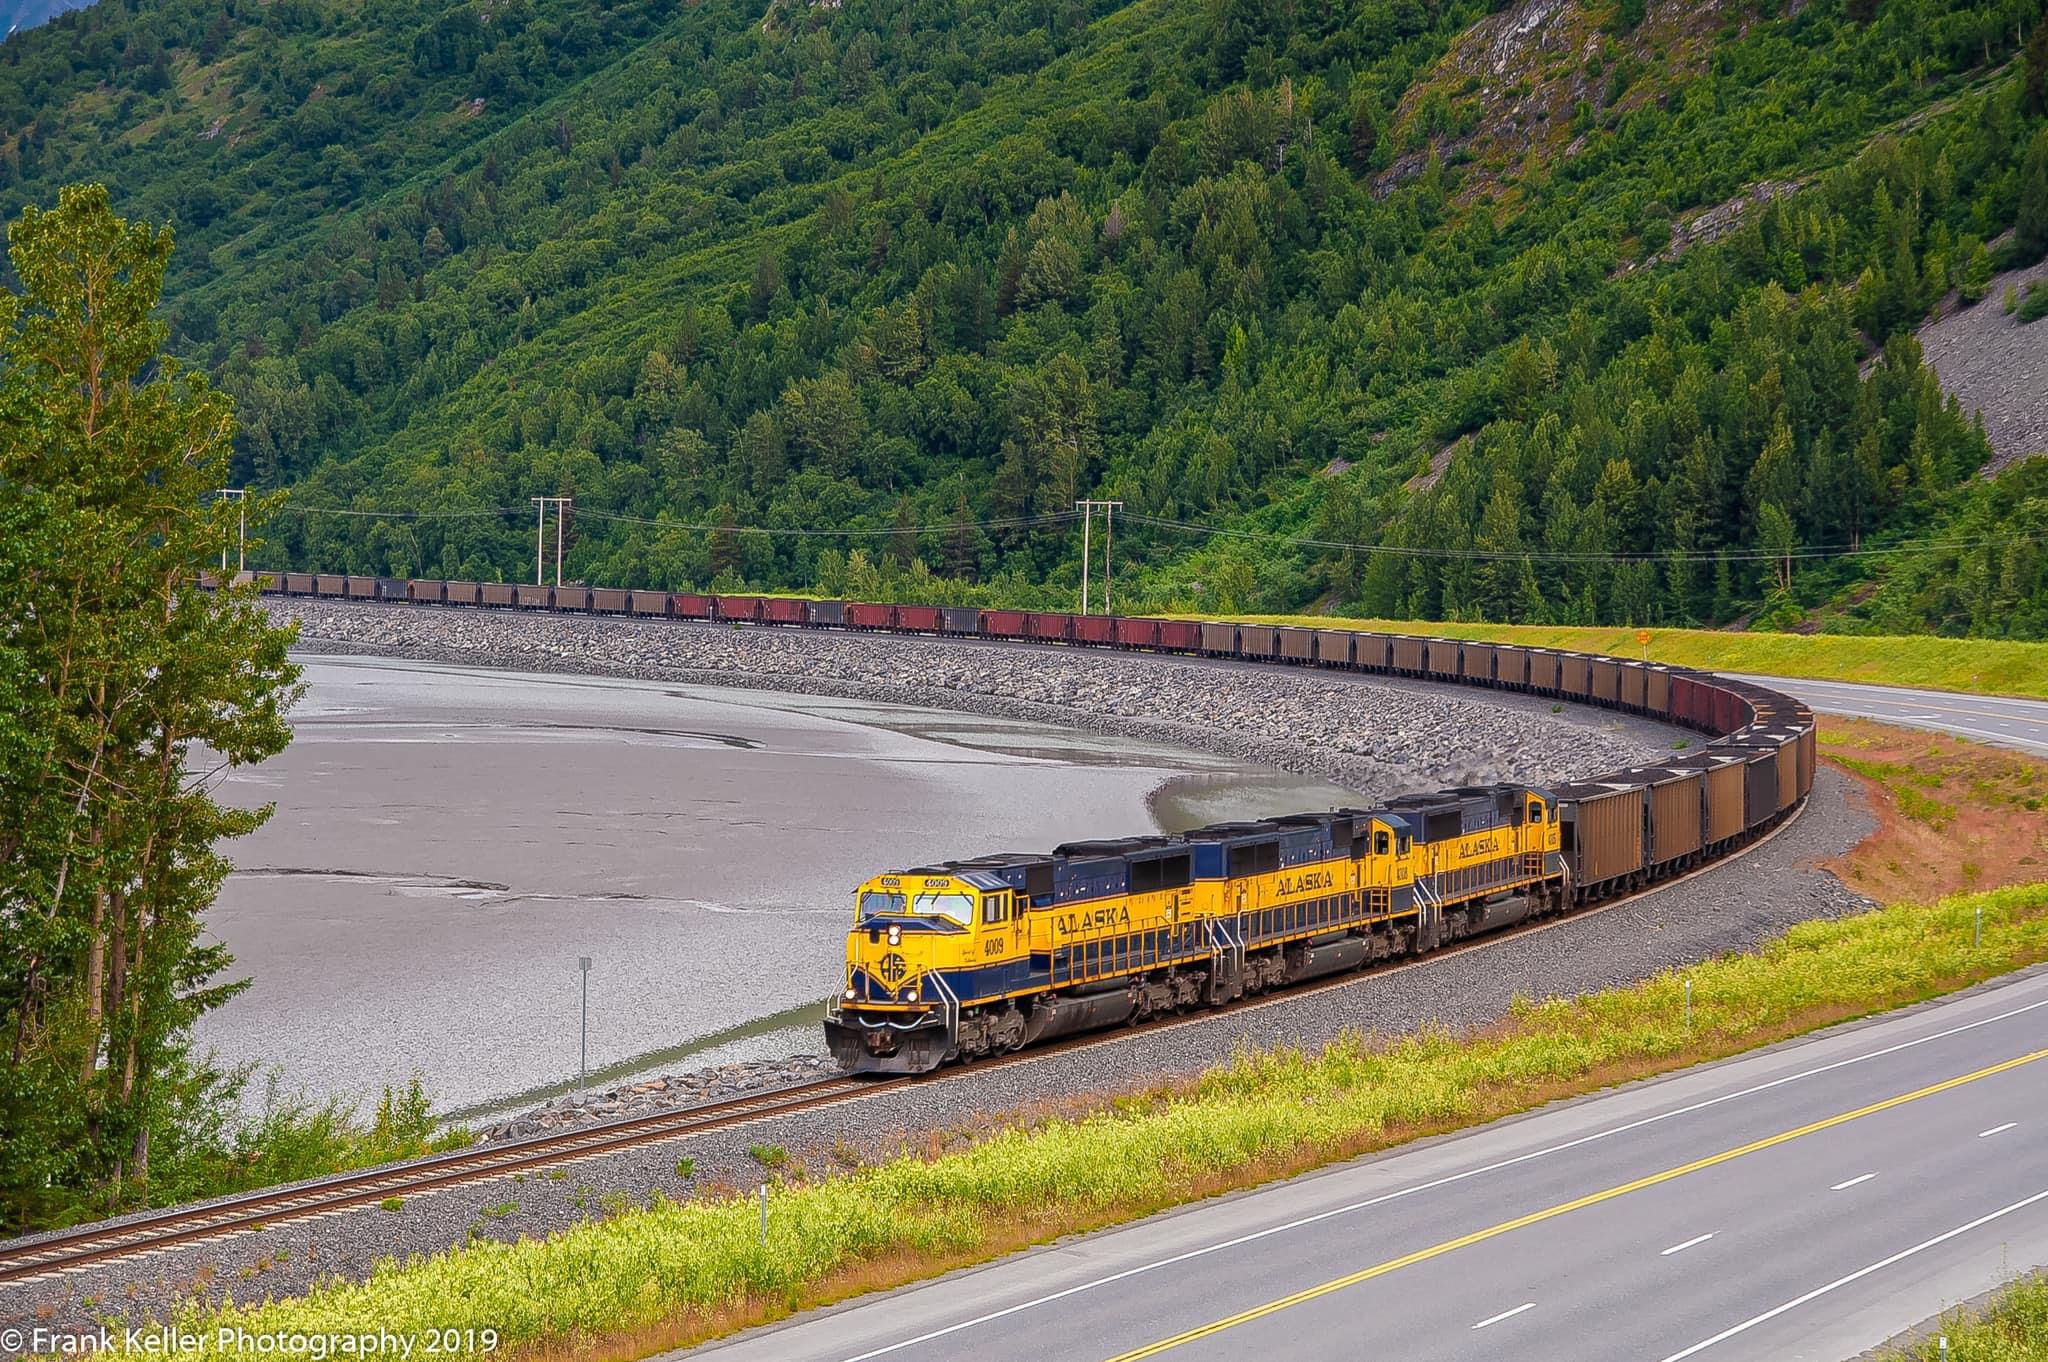 The southbound coal rolls through the sweeping curve as they approach the north switch of Brookman. To the left is Turnagain Arm and behind the train are the Chugach Mountains.